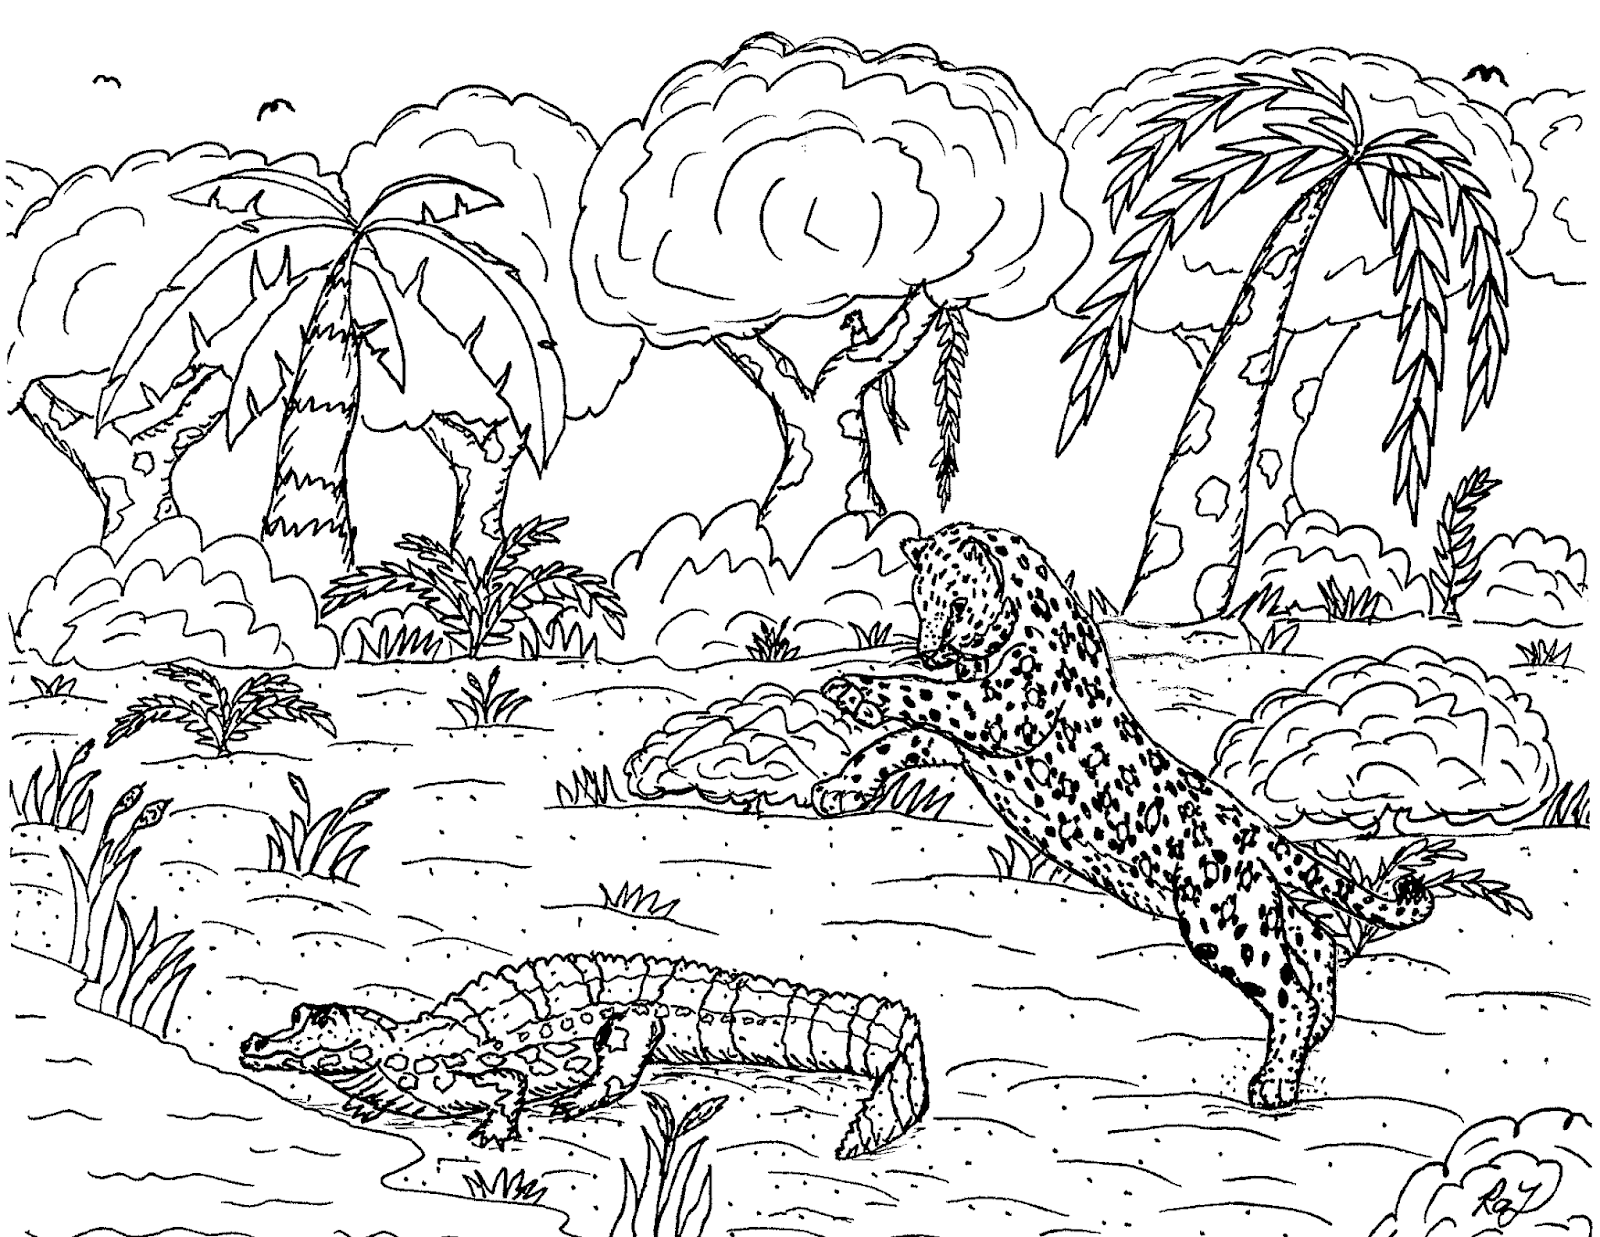 Download Robin's Great Coloring Pages: Prehistoric Mammals with Modern Mammals for Comparison